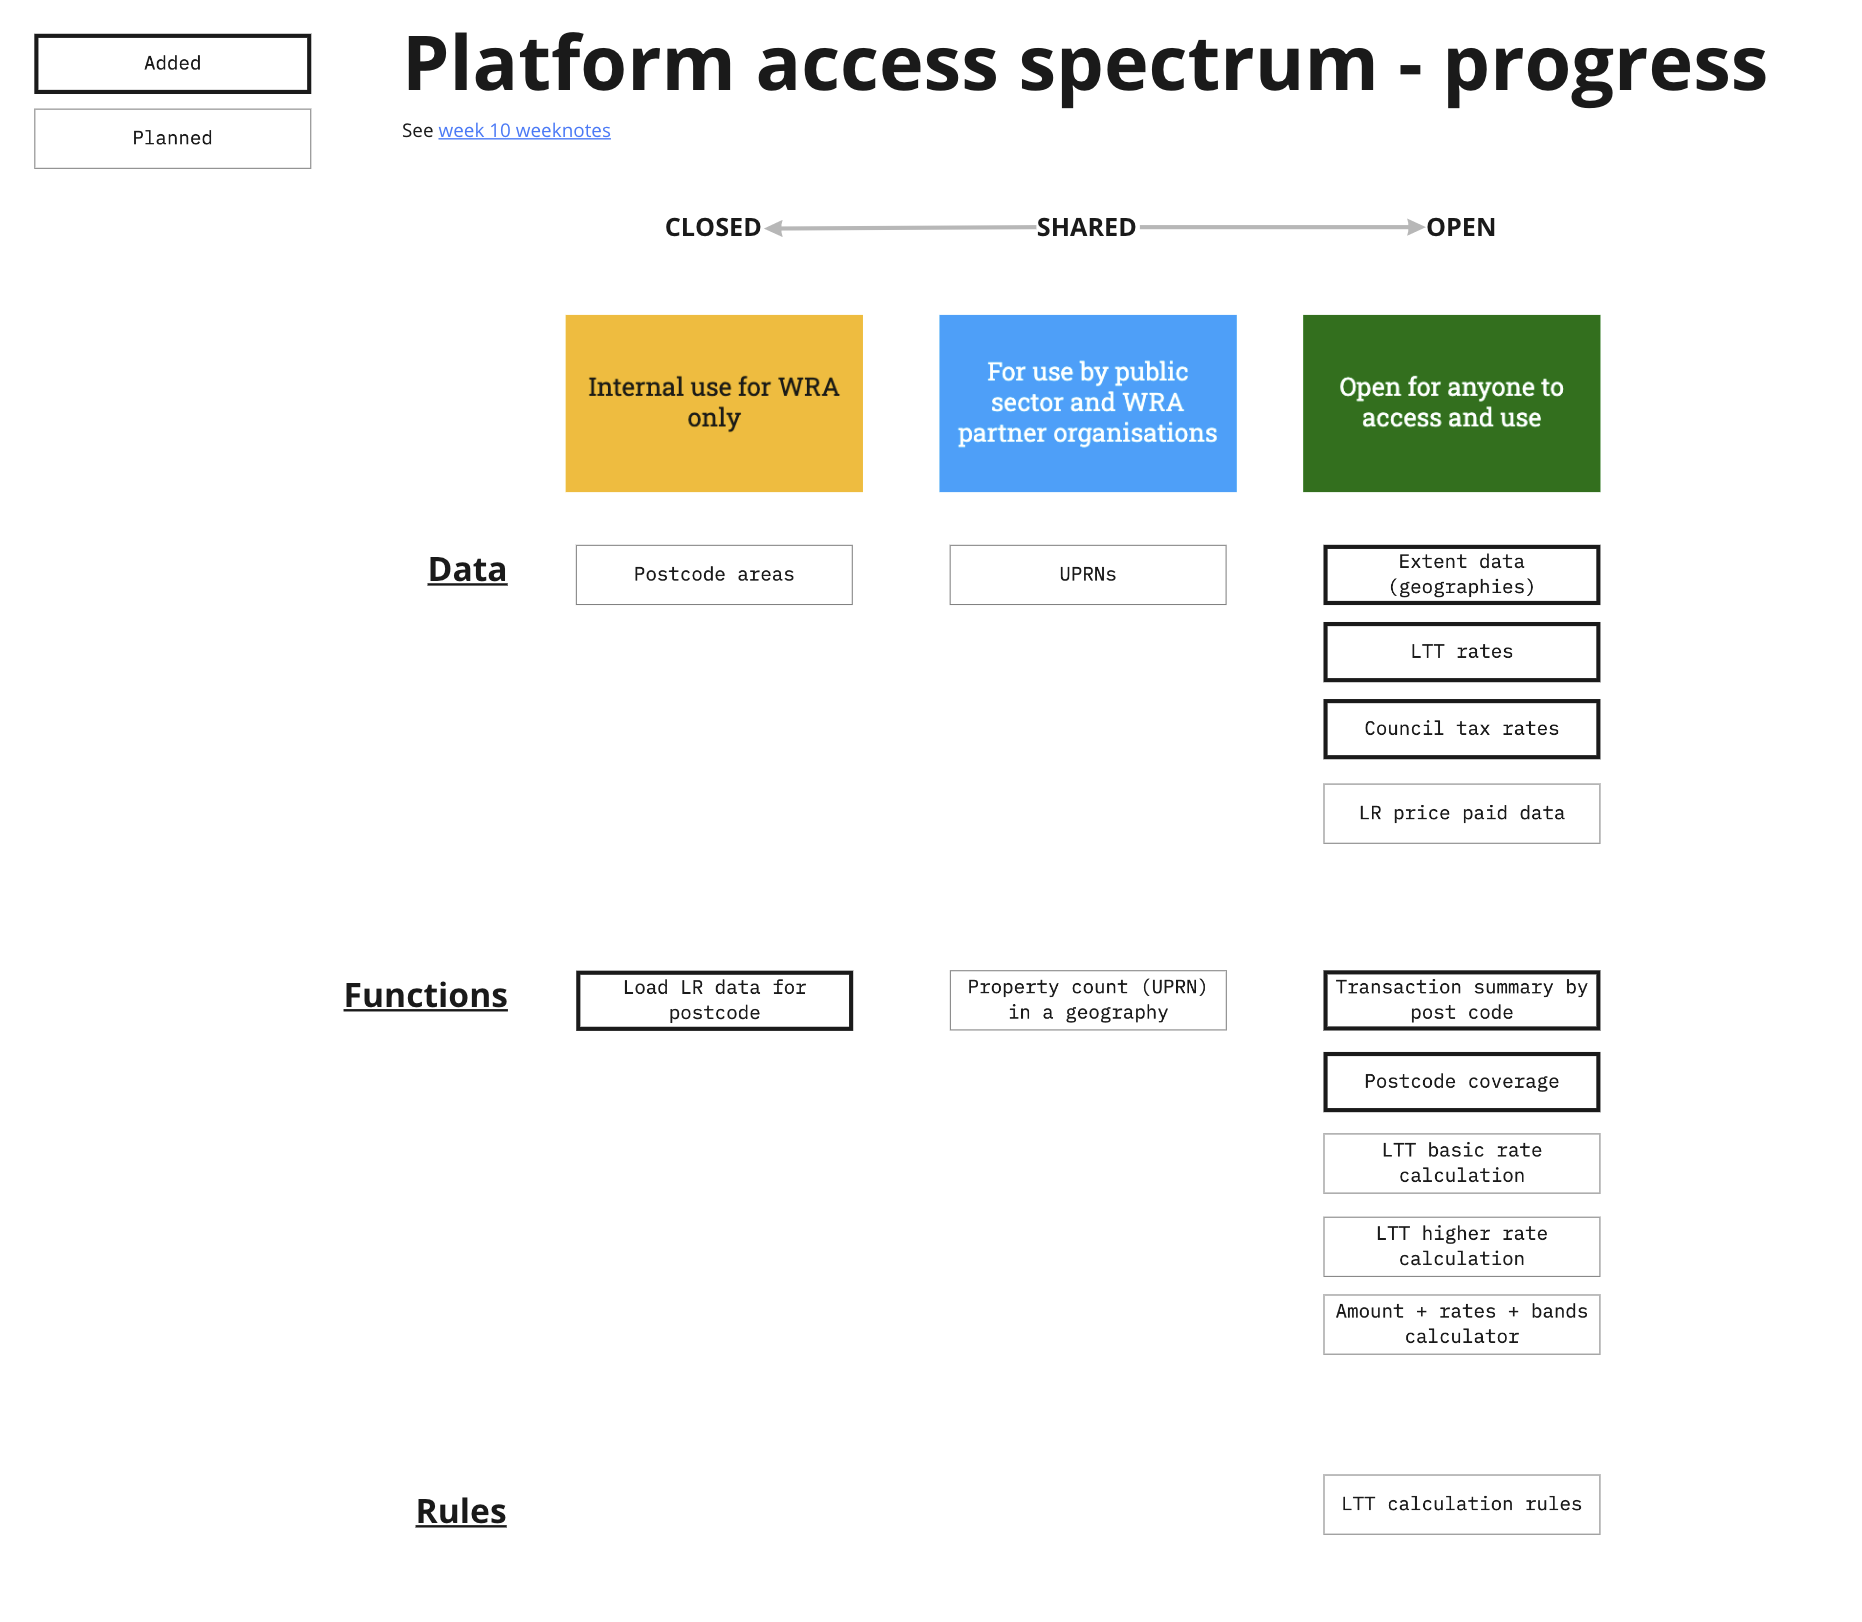 An image of the platform access spectrum. It has three states; closed, shared and open. Under each state it lists the data, functions and rules we've so far added to the platform.